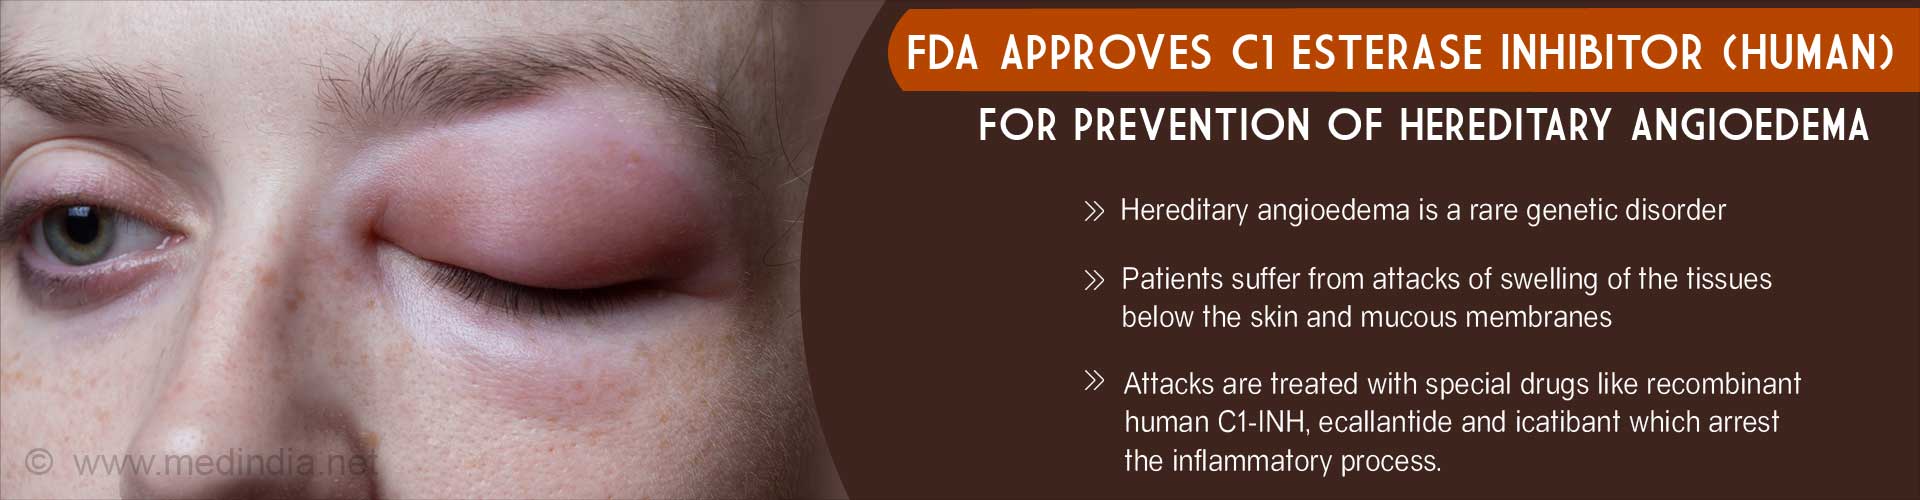 FDA Approves C1 Esterase Inhibitor (Human) for Prevention of Hereditary Angioedema
- Hereditary angioedema is a rare genetic disorder
- Patients suffer from attacks of swelling of the tissues below the skin and mucous membranes
- Attacks are treated with special drugs like recombinant human C1-INH, ecallantide and icatibant which arrest the inflammatory process
